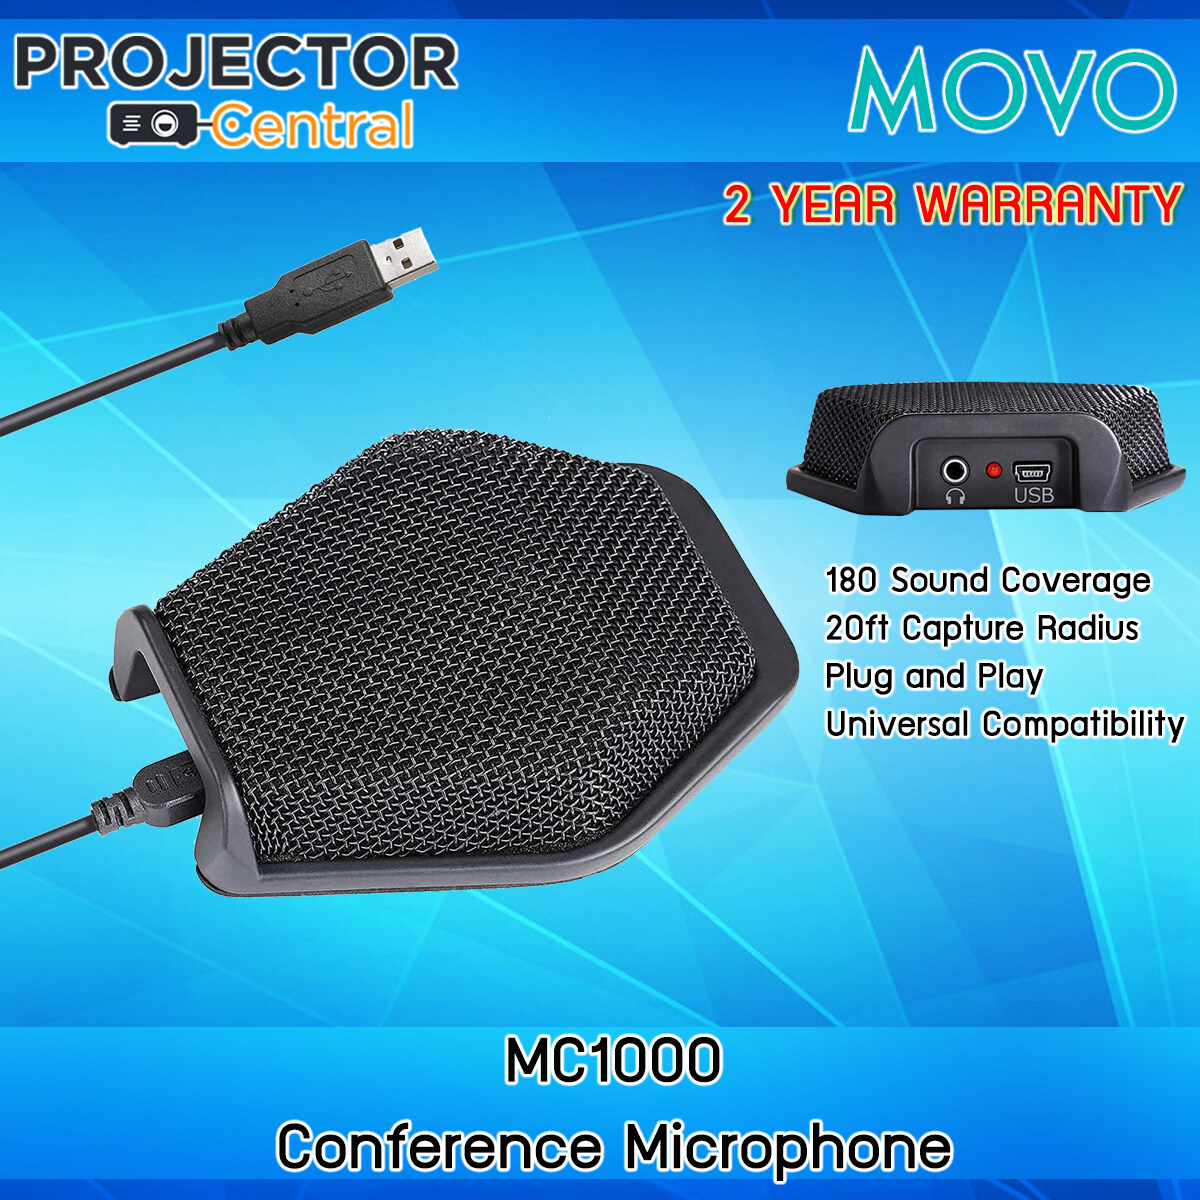 Movo MC1000 USB Conference USB Microphone for PC & Mac